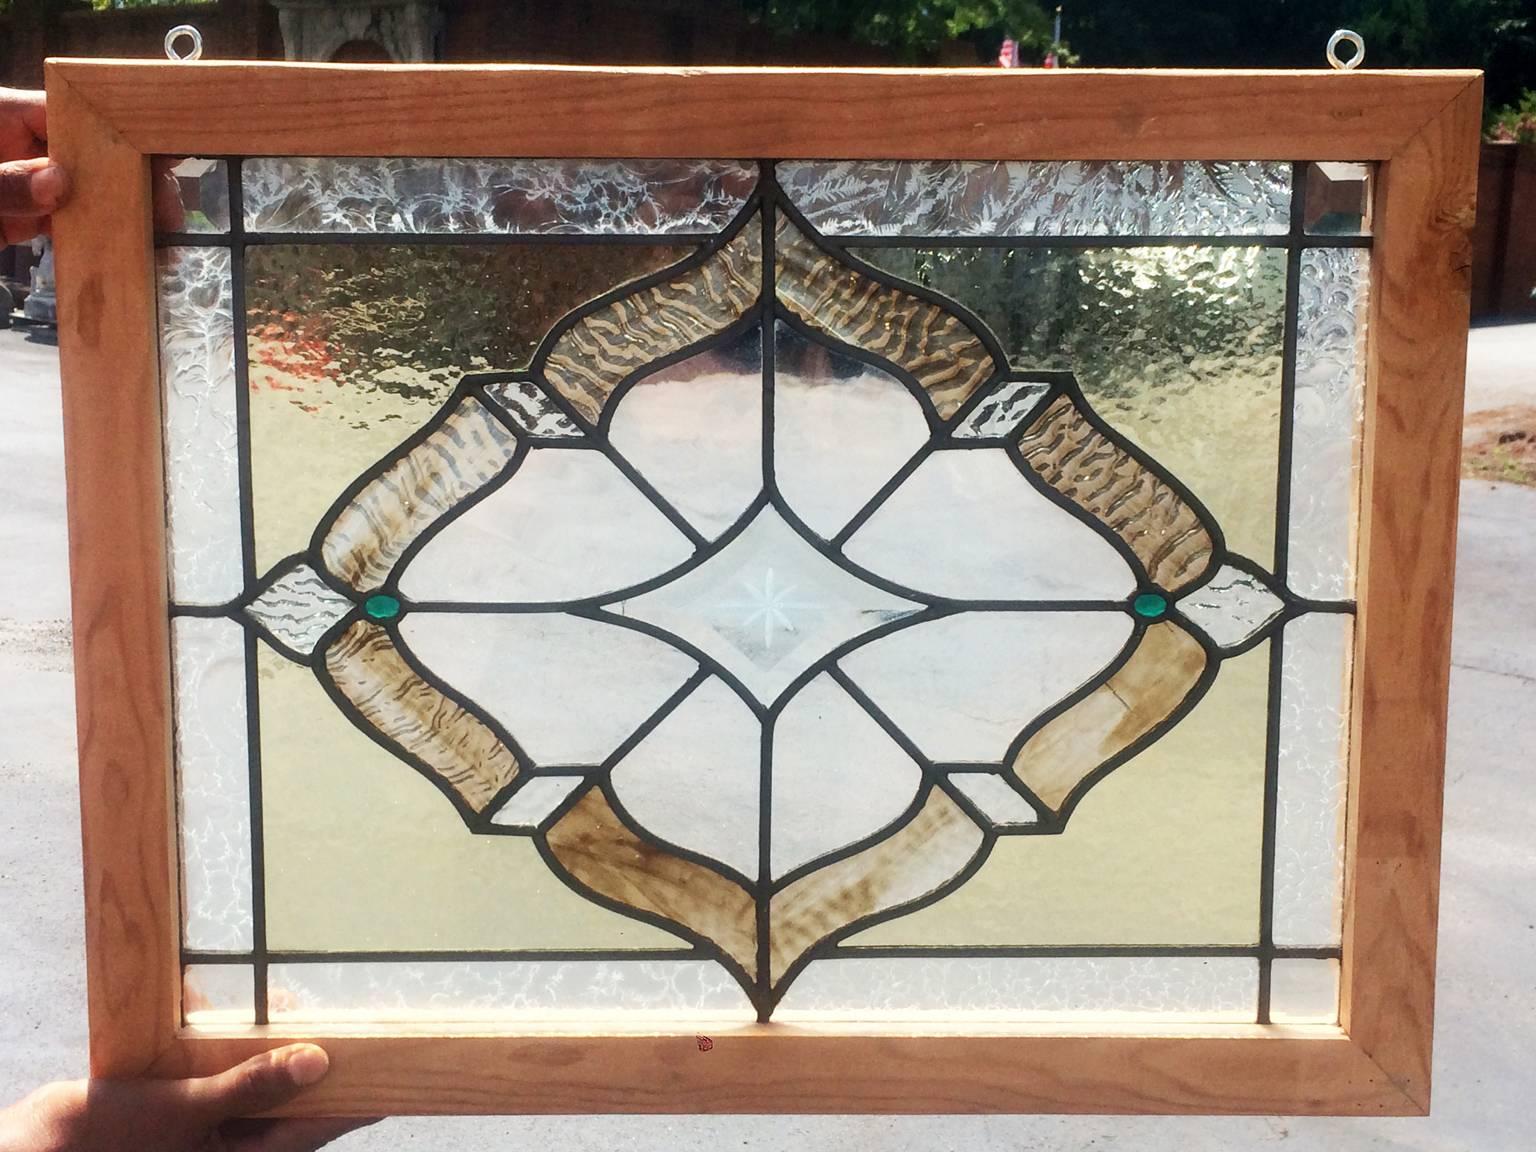 American Victorian stained, rippled, beveled, crackled, etched and jeweled window. This window is a wonderful piece with many glass different glass treatments going on. There are a few small cracks and the frame is new, but it still looks amazing.